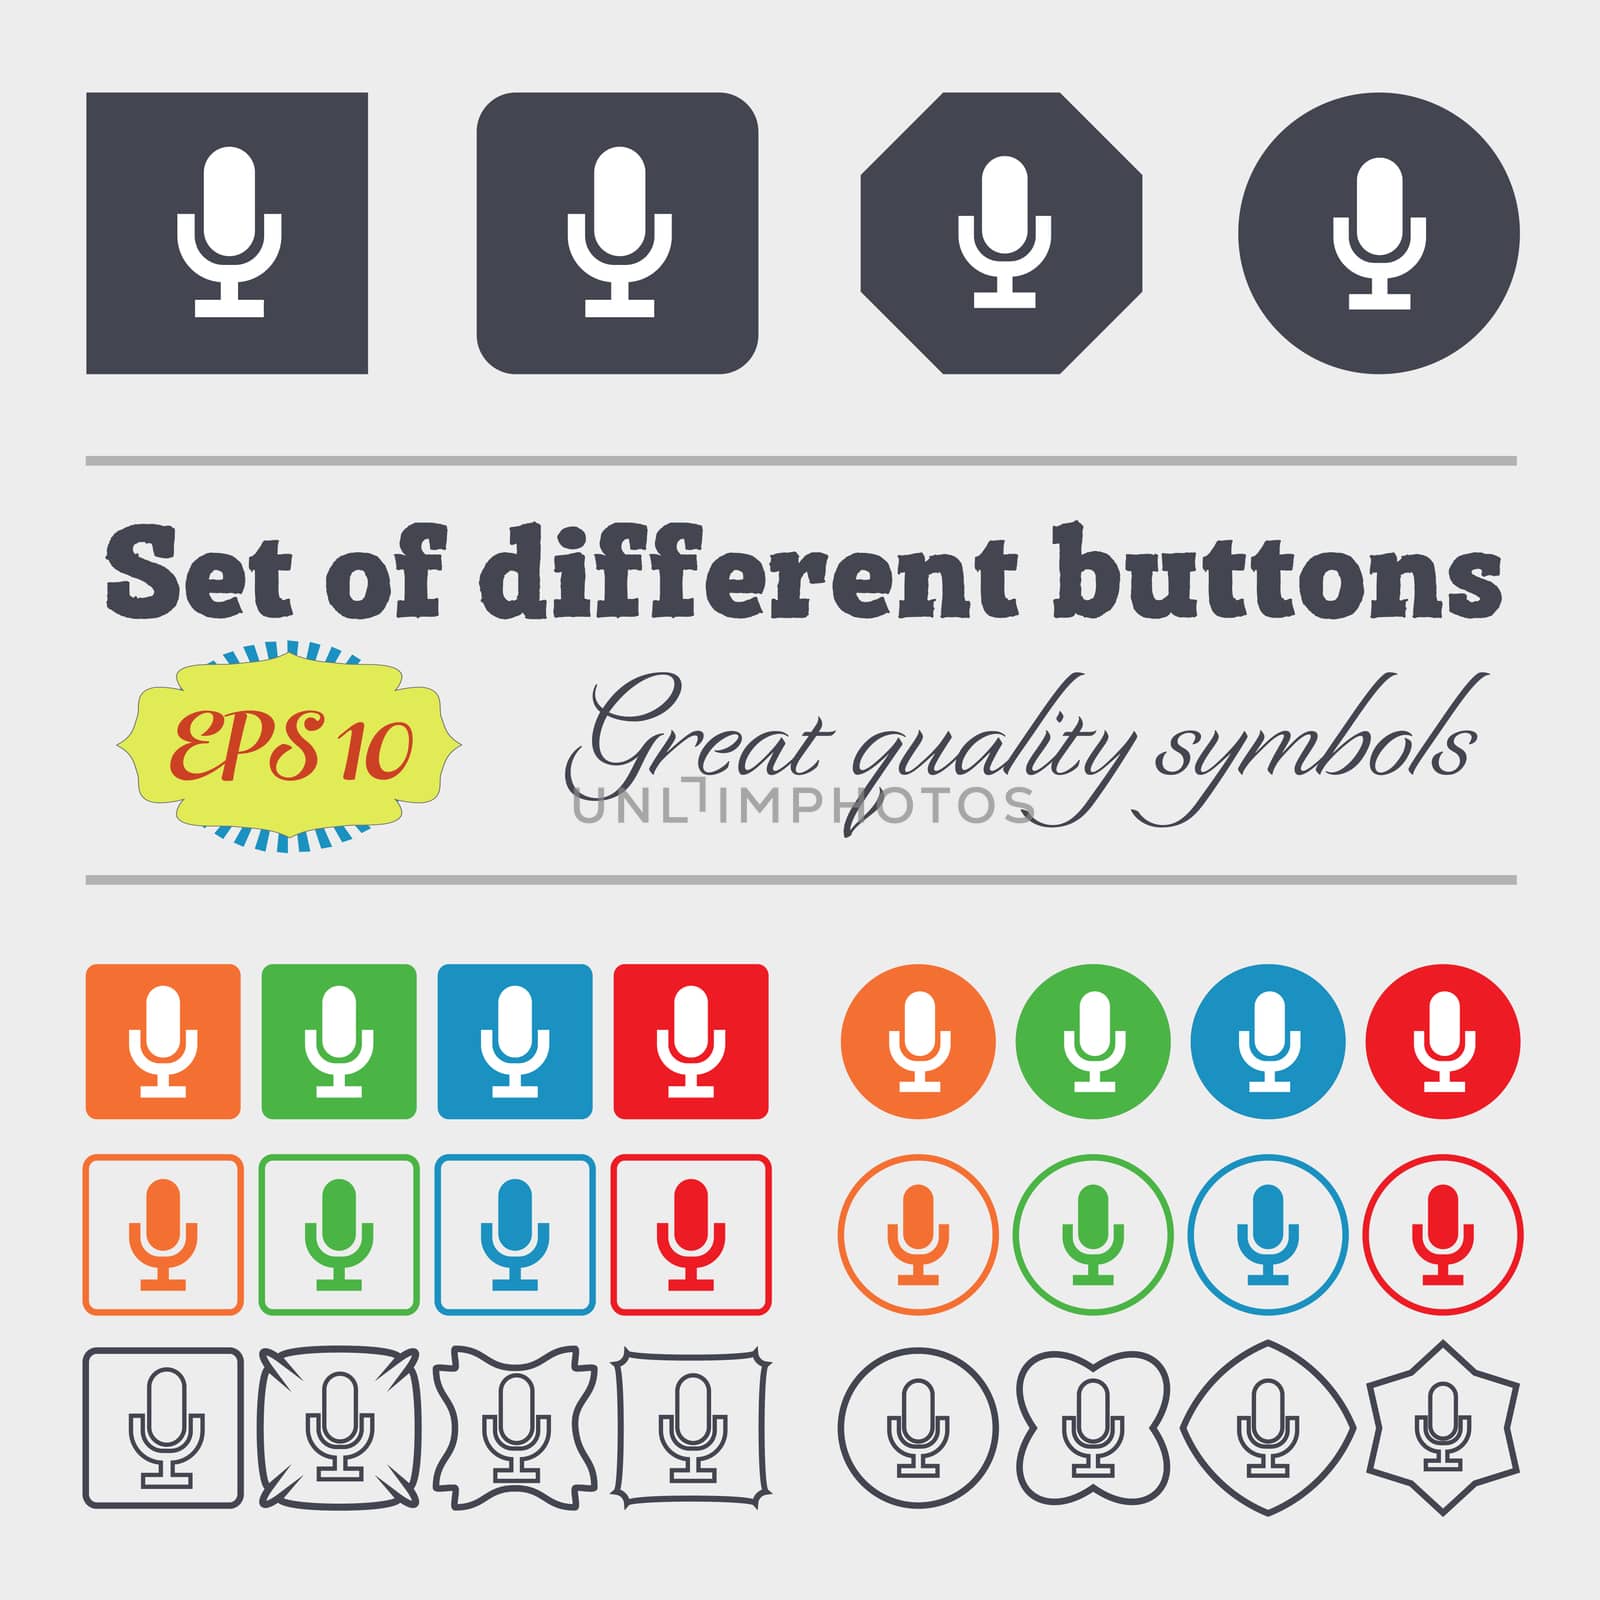 microphone icon sign. Big set of colorful, diverse, high-quality buttons. illustration